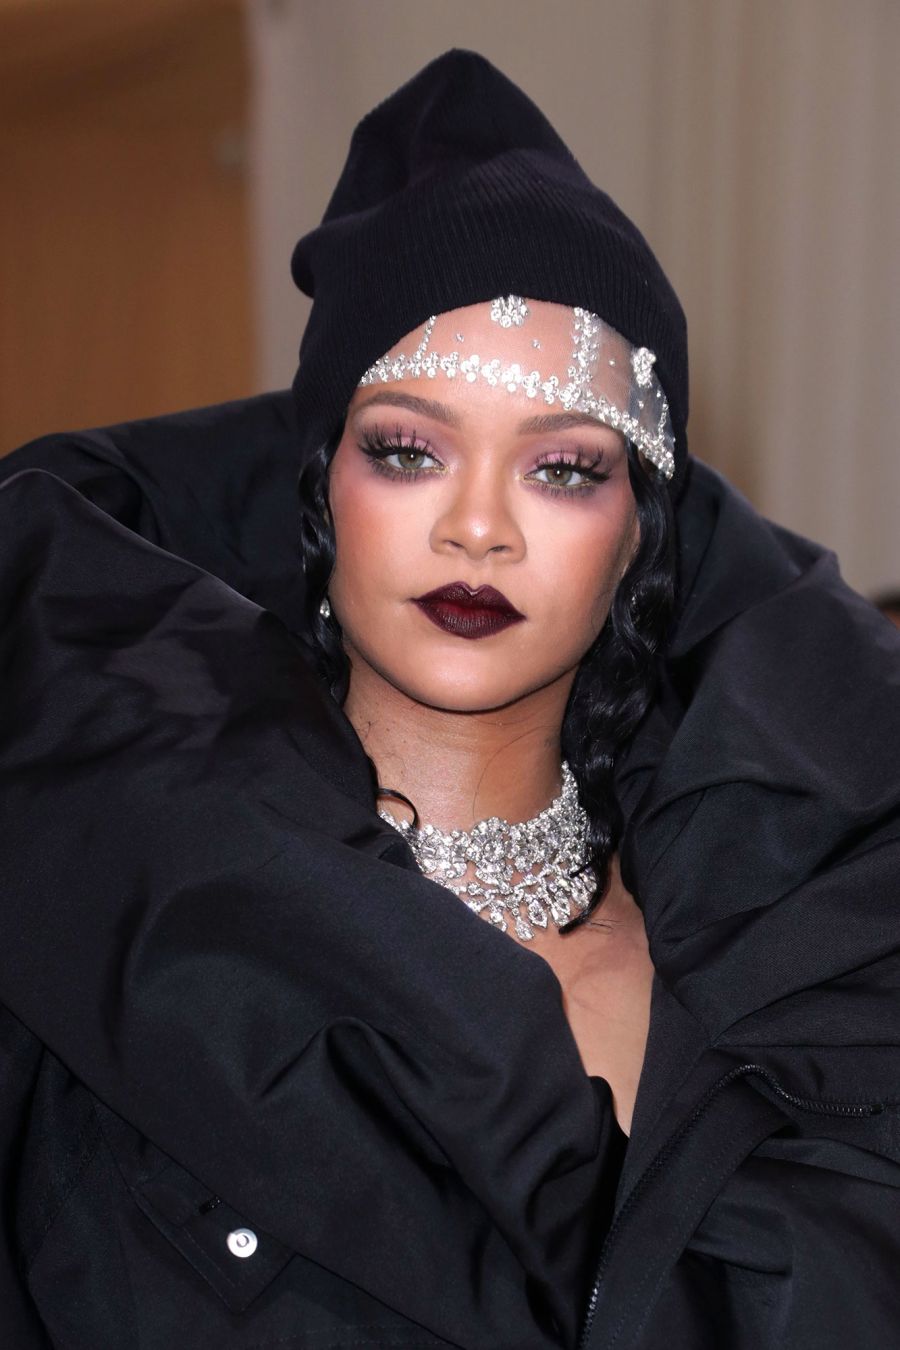 Rihanna Most Extravagant Celebrity Bling From the 2021 Met Gala